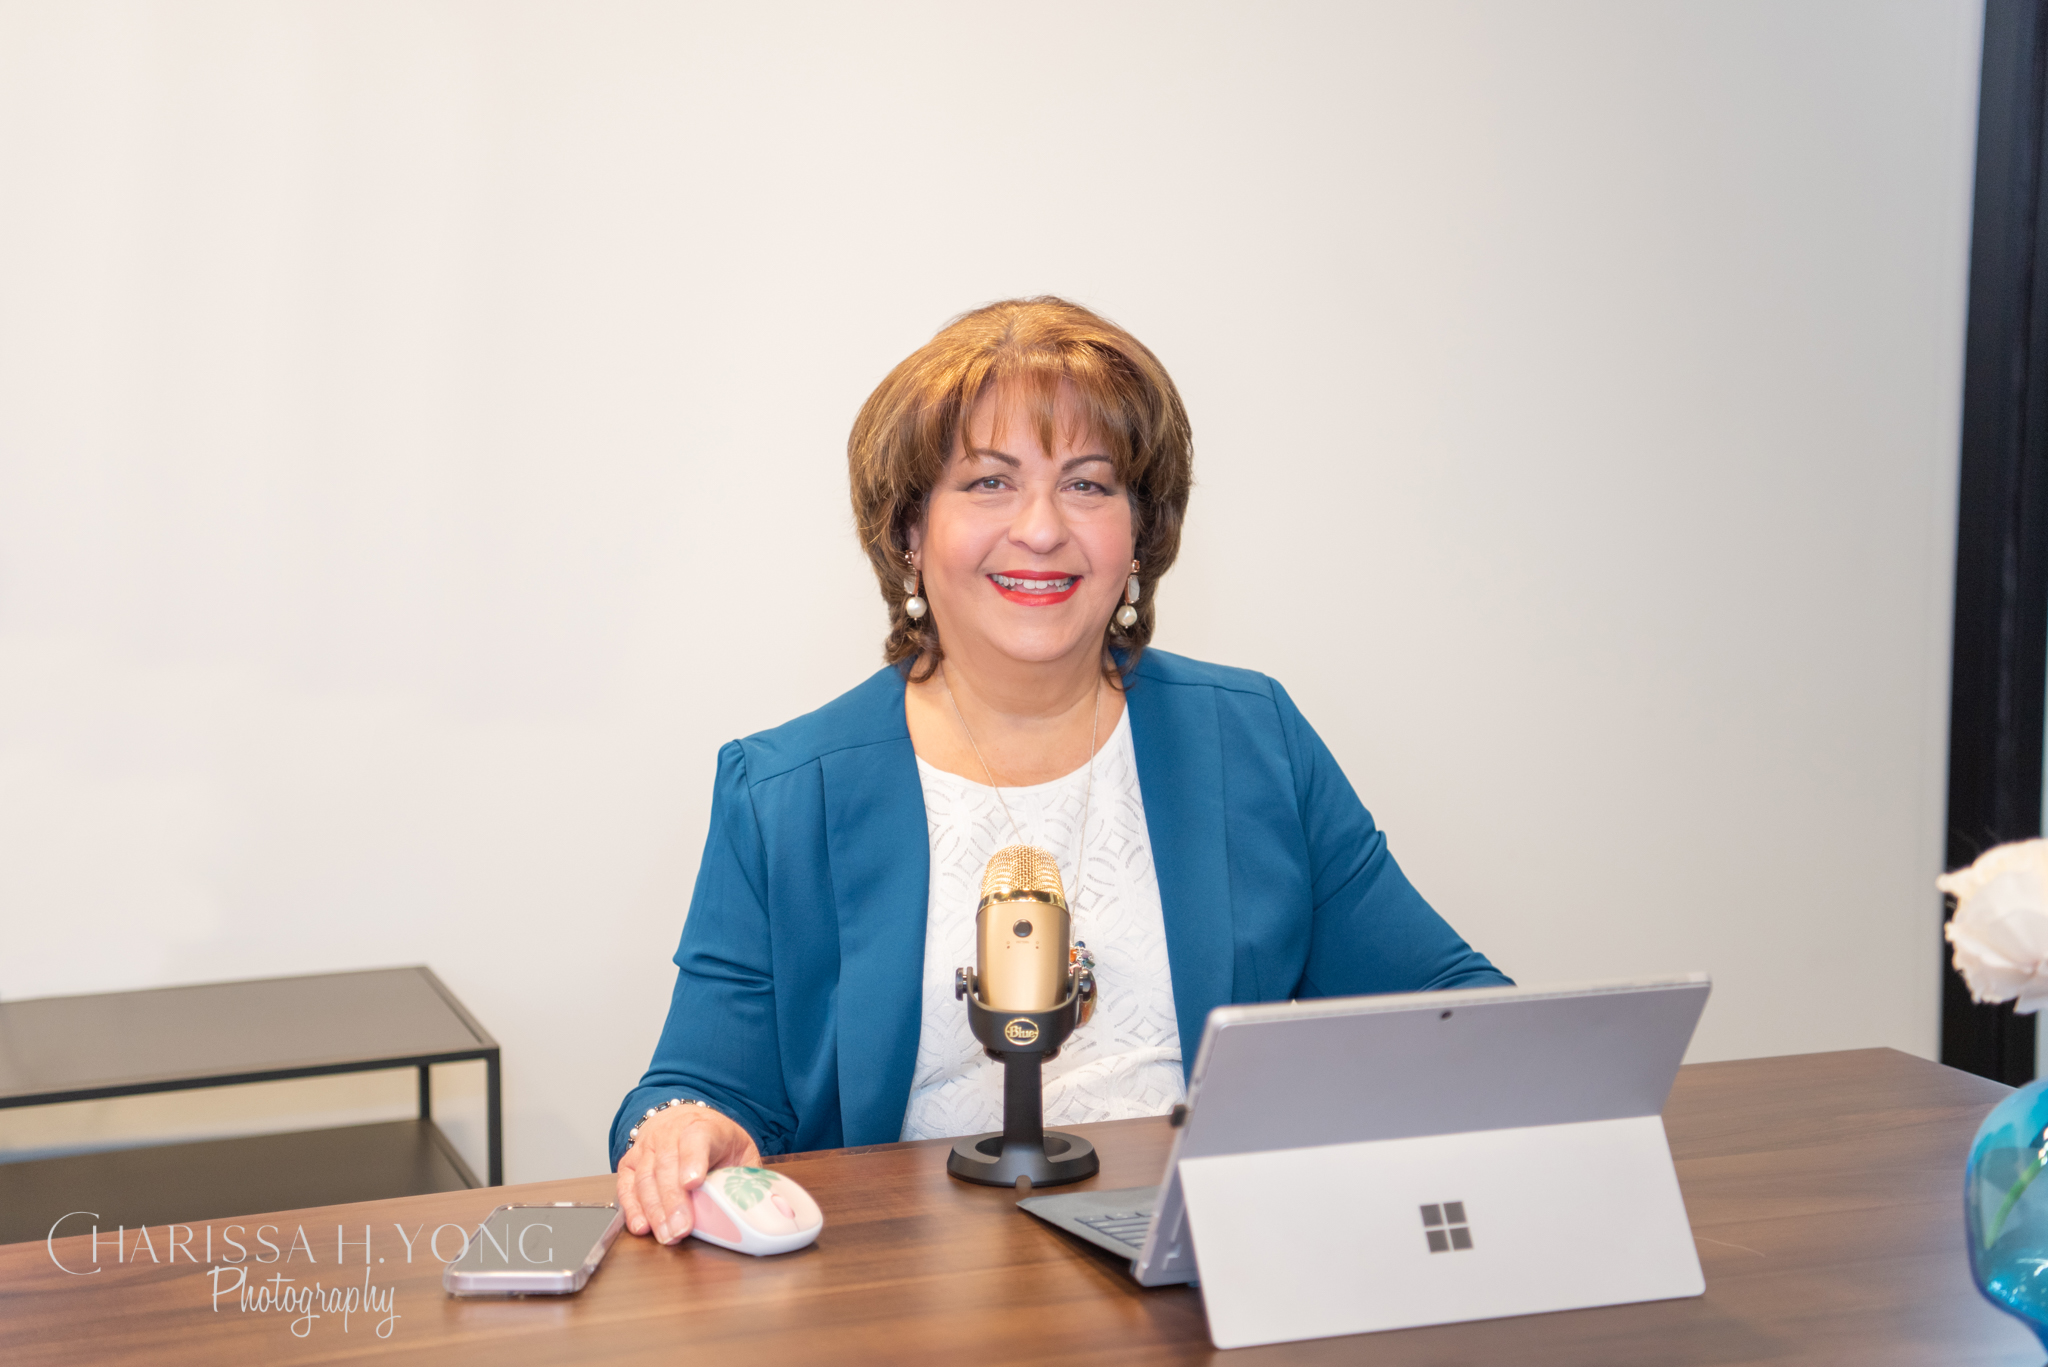 A middle age woman in the blue jacket sitting on the desk working with her gold microphone.